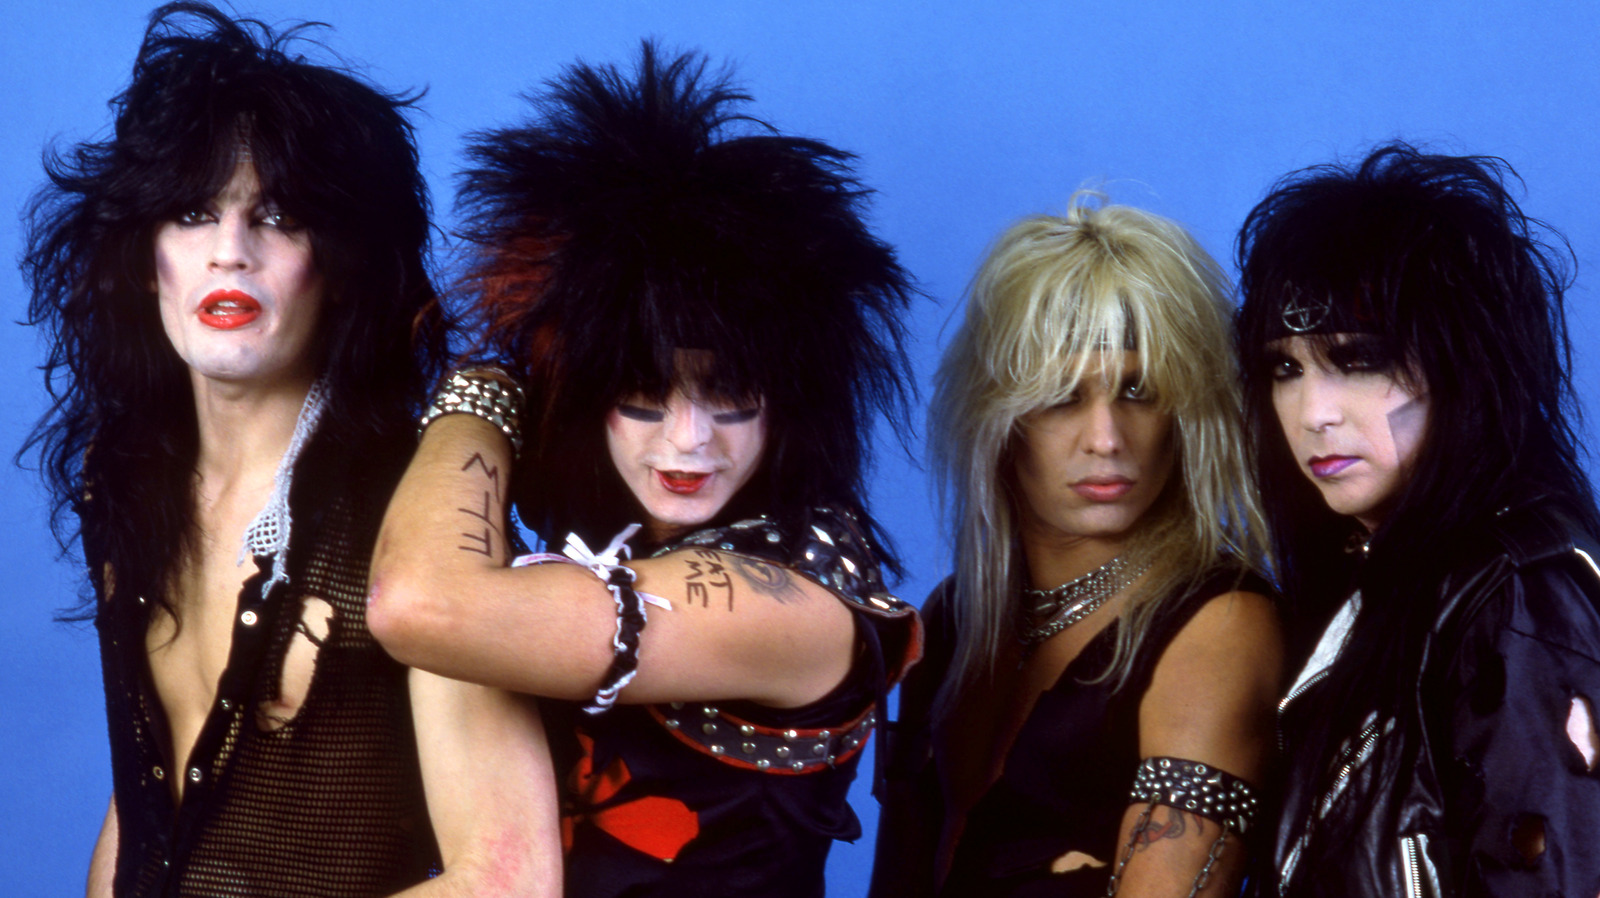 Best '80s Hair Band Songs (Top 100 Glam Metal Tracks to Blast) - Spinditty